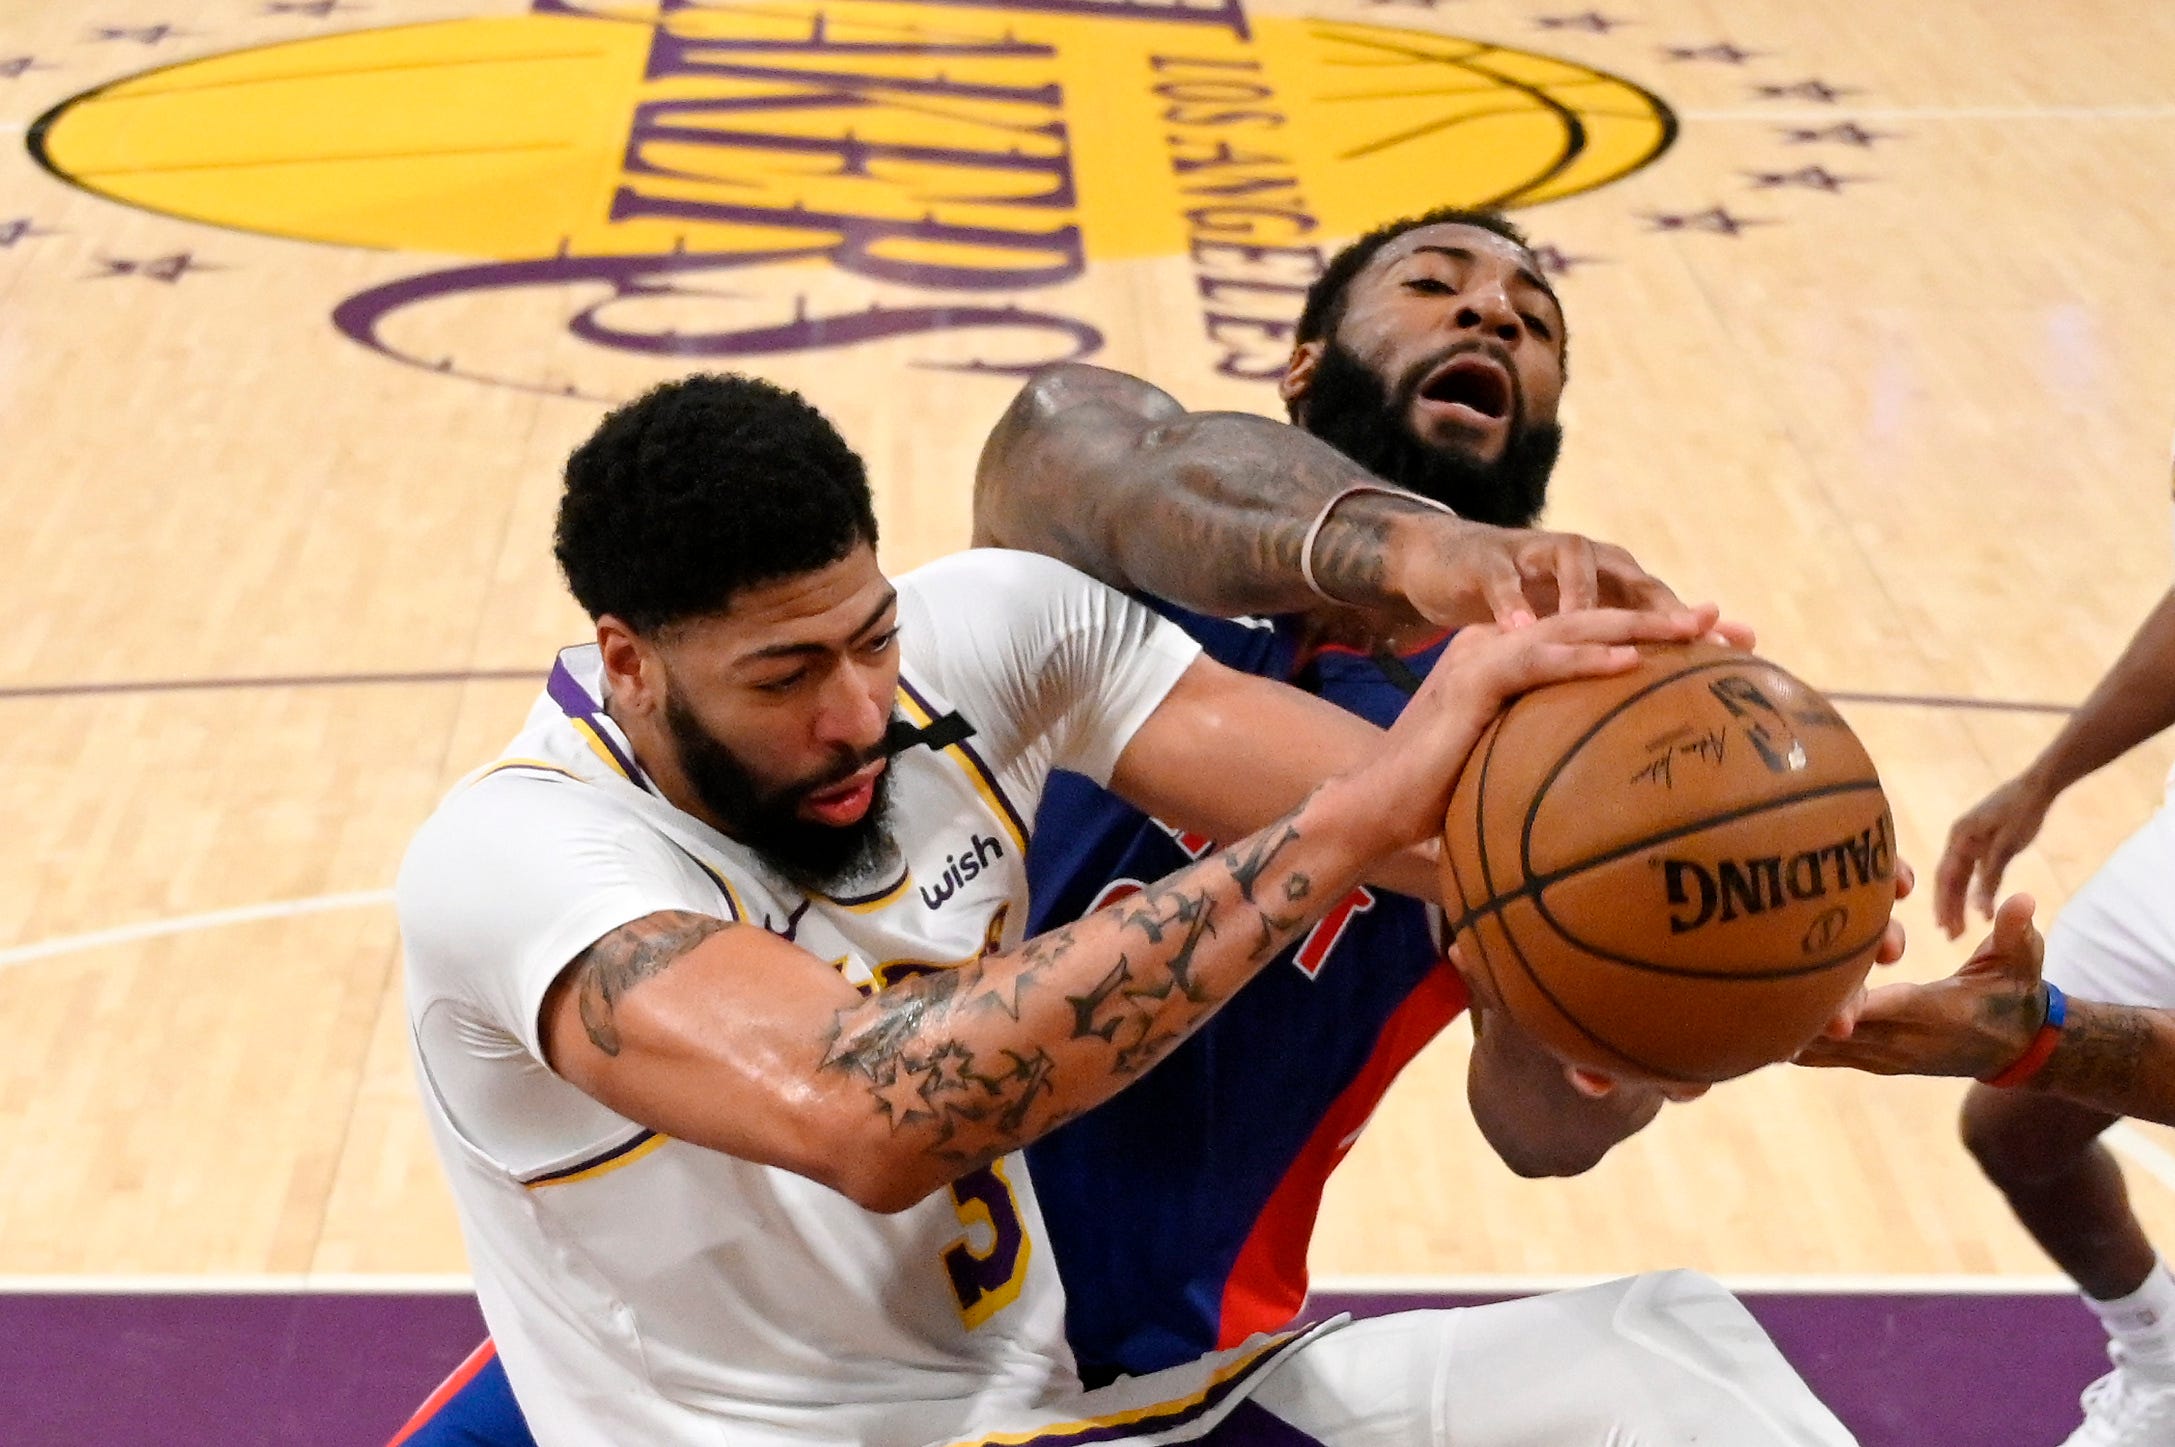 Los Angeles Lakers forward Anthony Davis, left, and Detroit Pistons center Andre Drummond grapple for the ball during the first half.